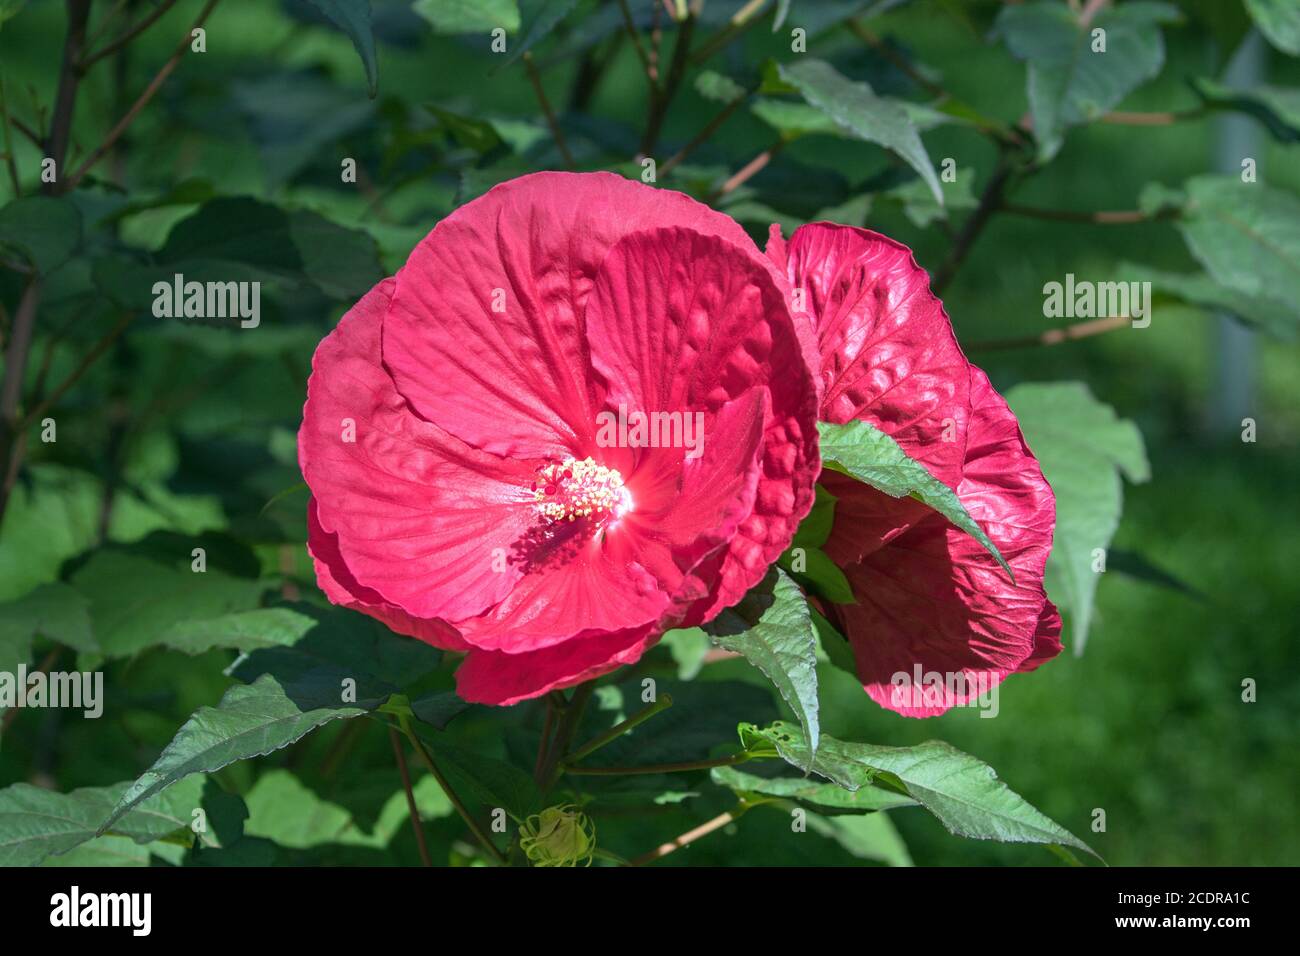 Closeup of large pink flowers of Perennail Hibiscus shrub blooming in Canadian garden in summer. The backgroungd is leafy green. Stock Photo